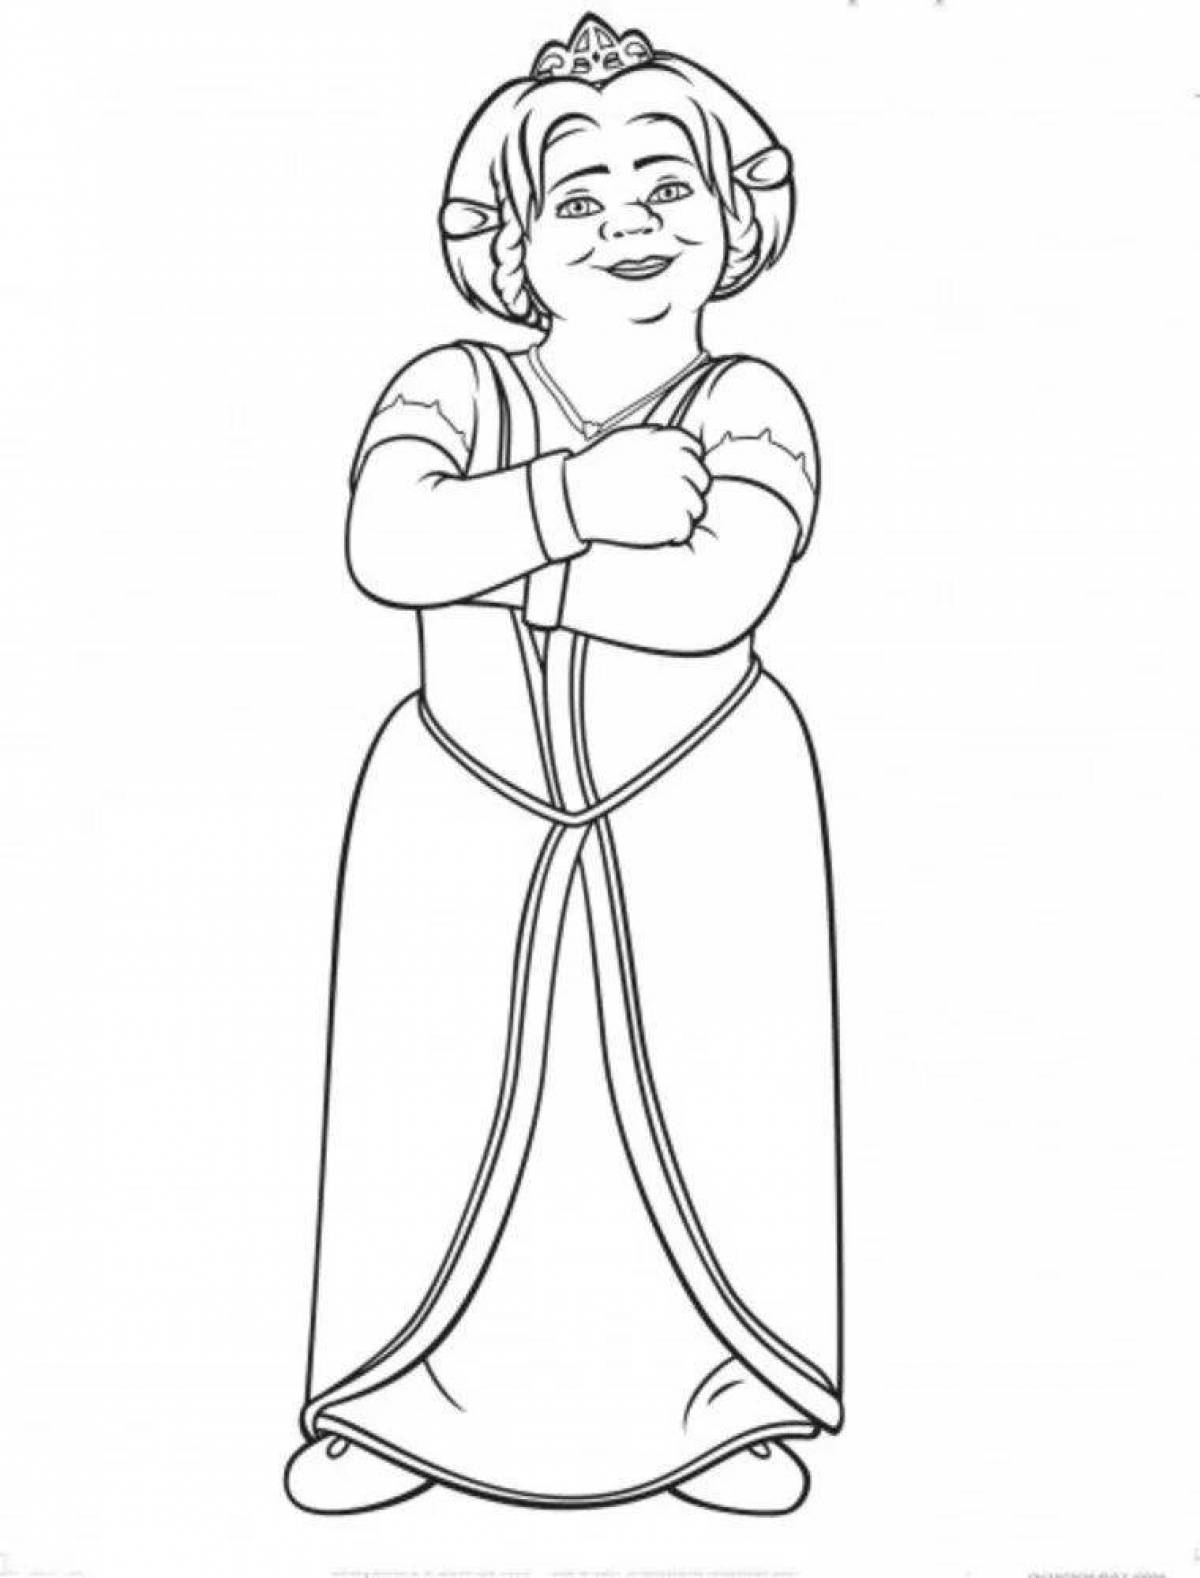 Animated fiona coloring page